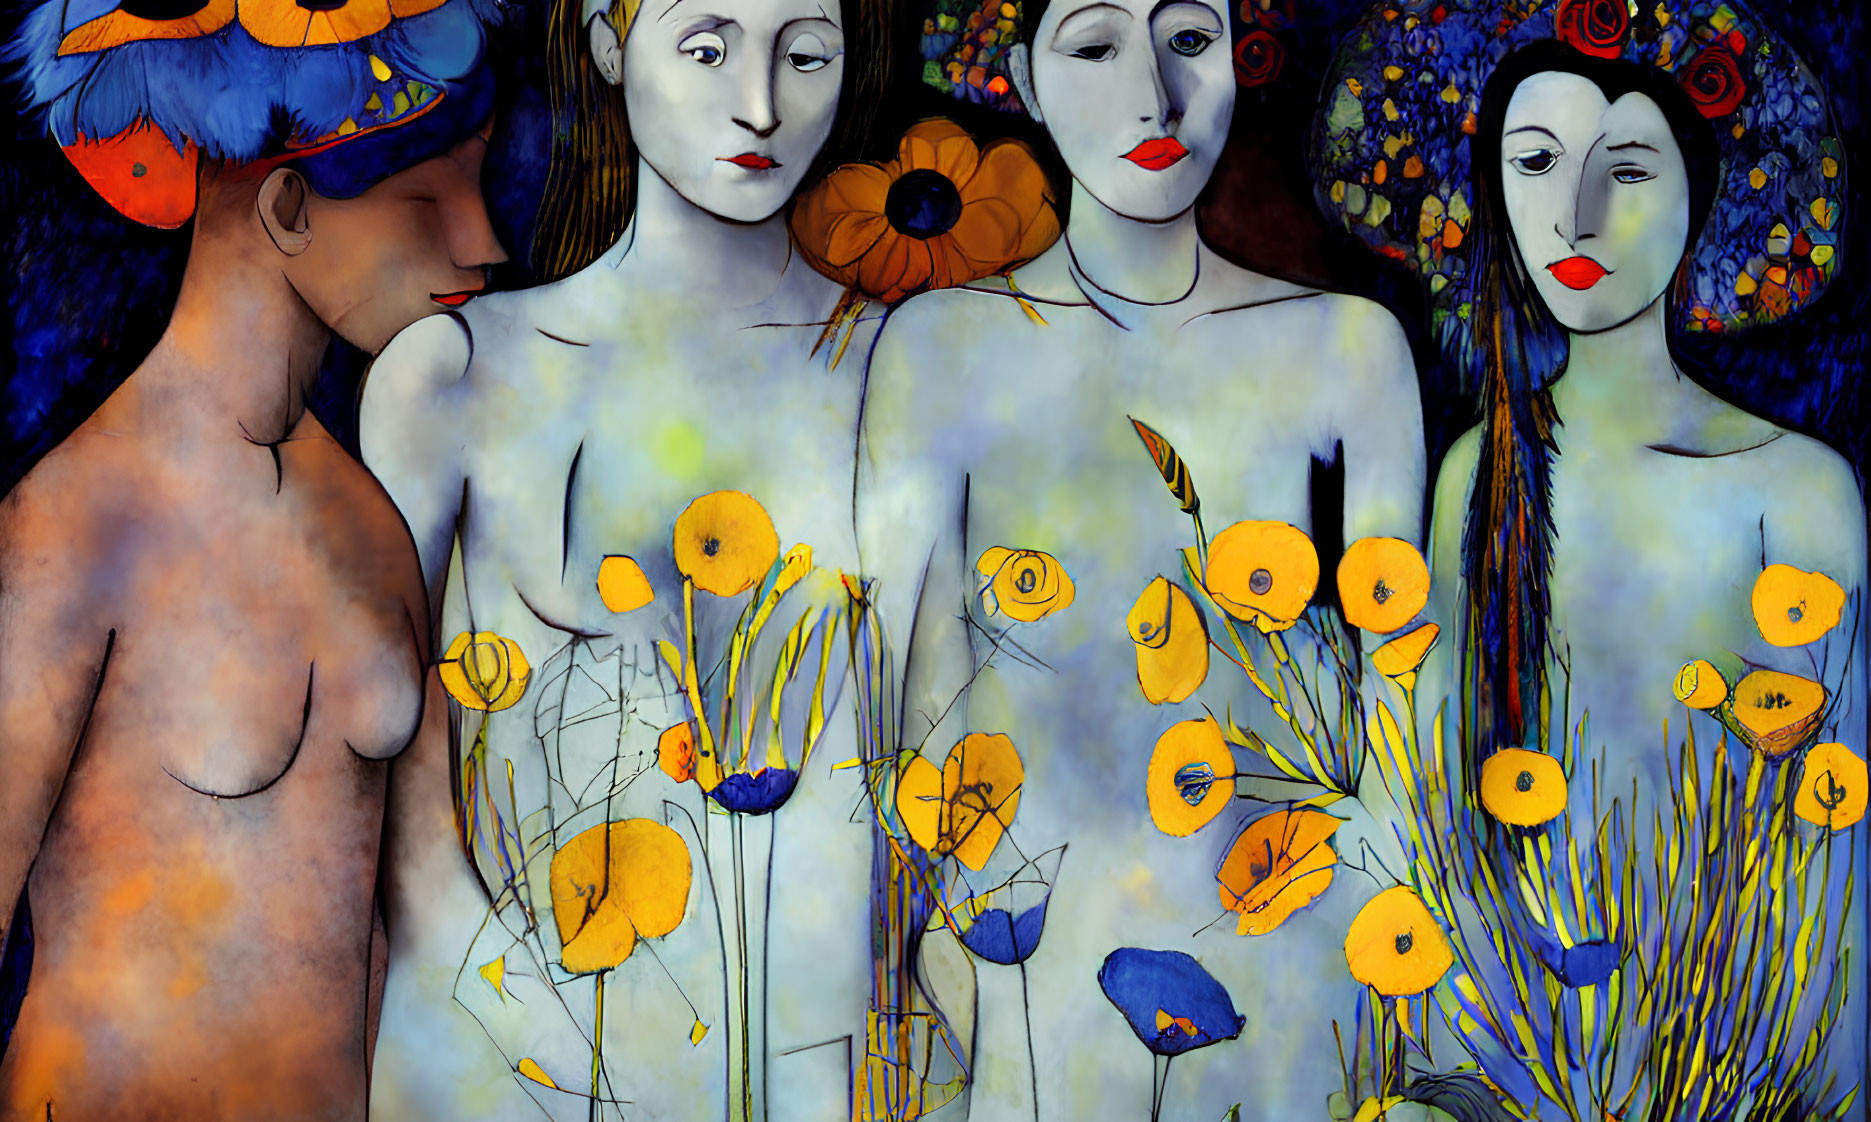 Vibrant painting of stylized figures against blue background with flowers